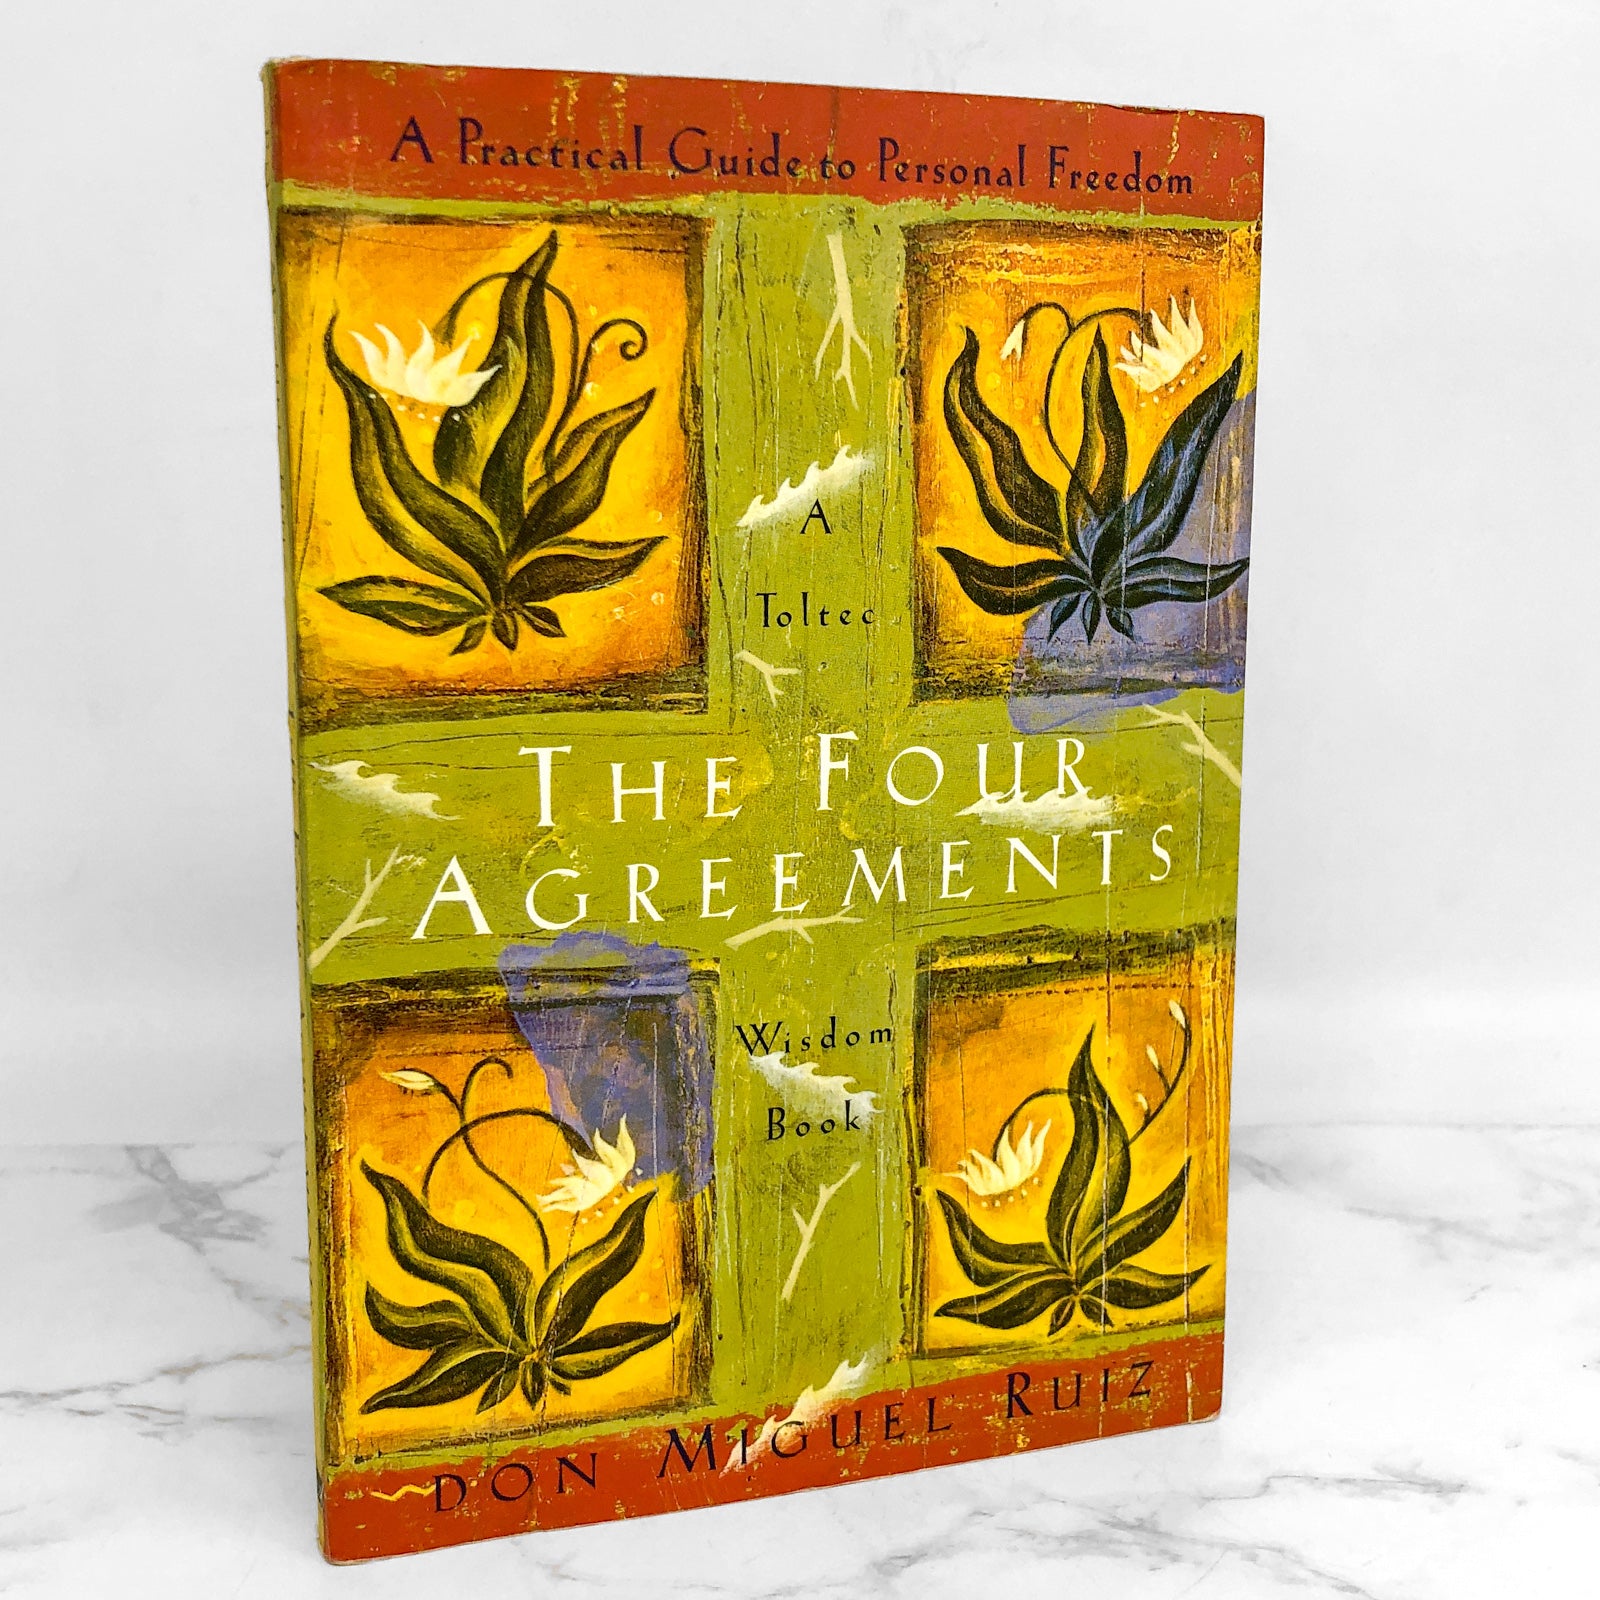 The Four Agreements by Don Miguel Ruiz [FIRST EDITION PAPERBACK] 1997